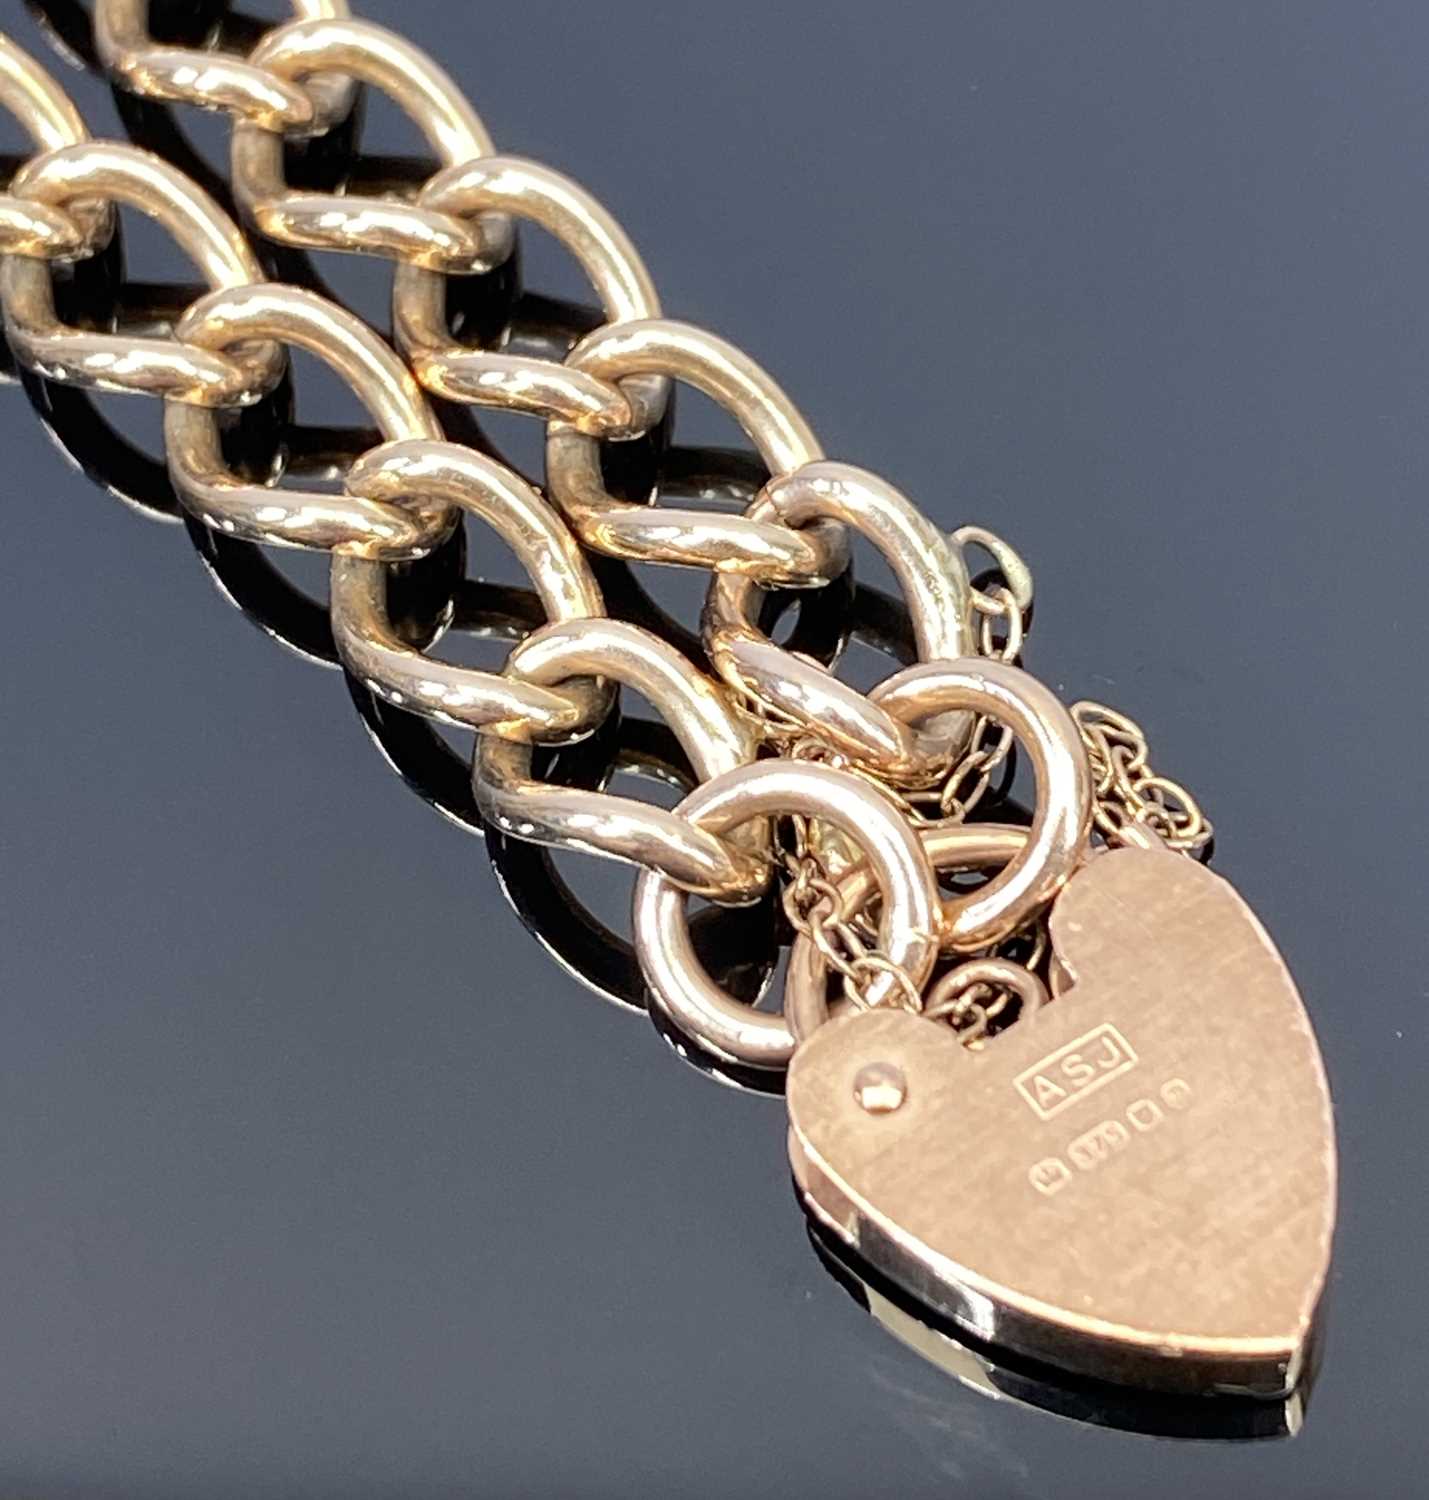 9CT GOLD CURB LINK BRACELET with padlock clasp and safety chain, 18cms approx L, 14.8grms gross - Image 2 of 3